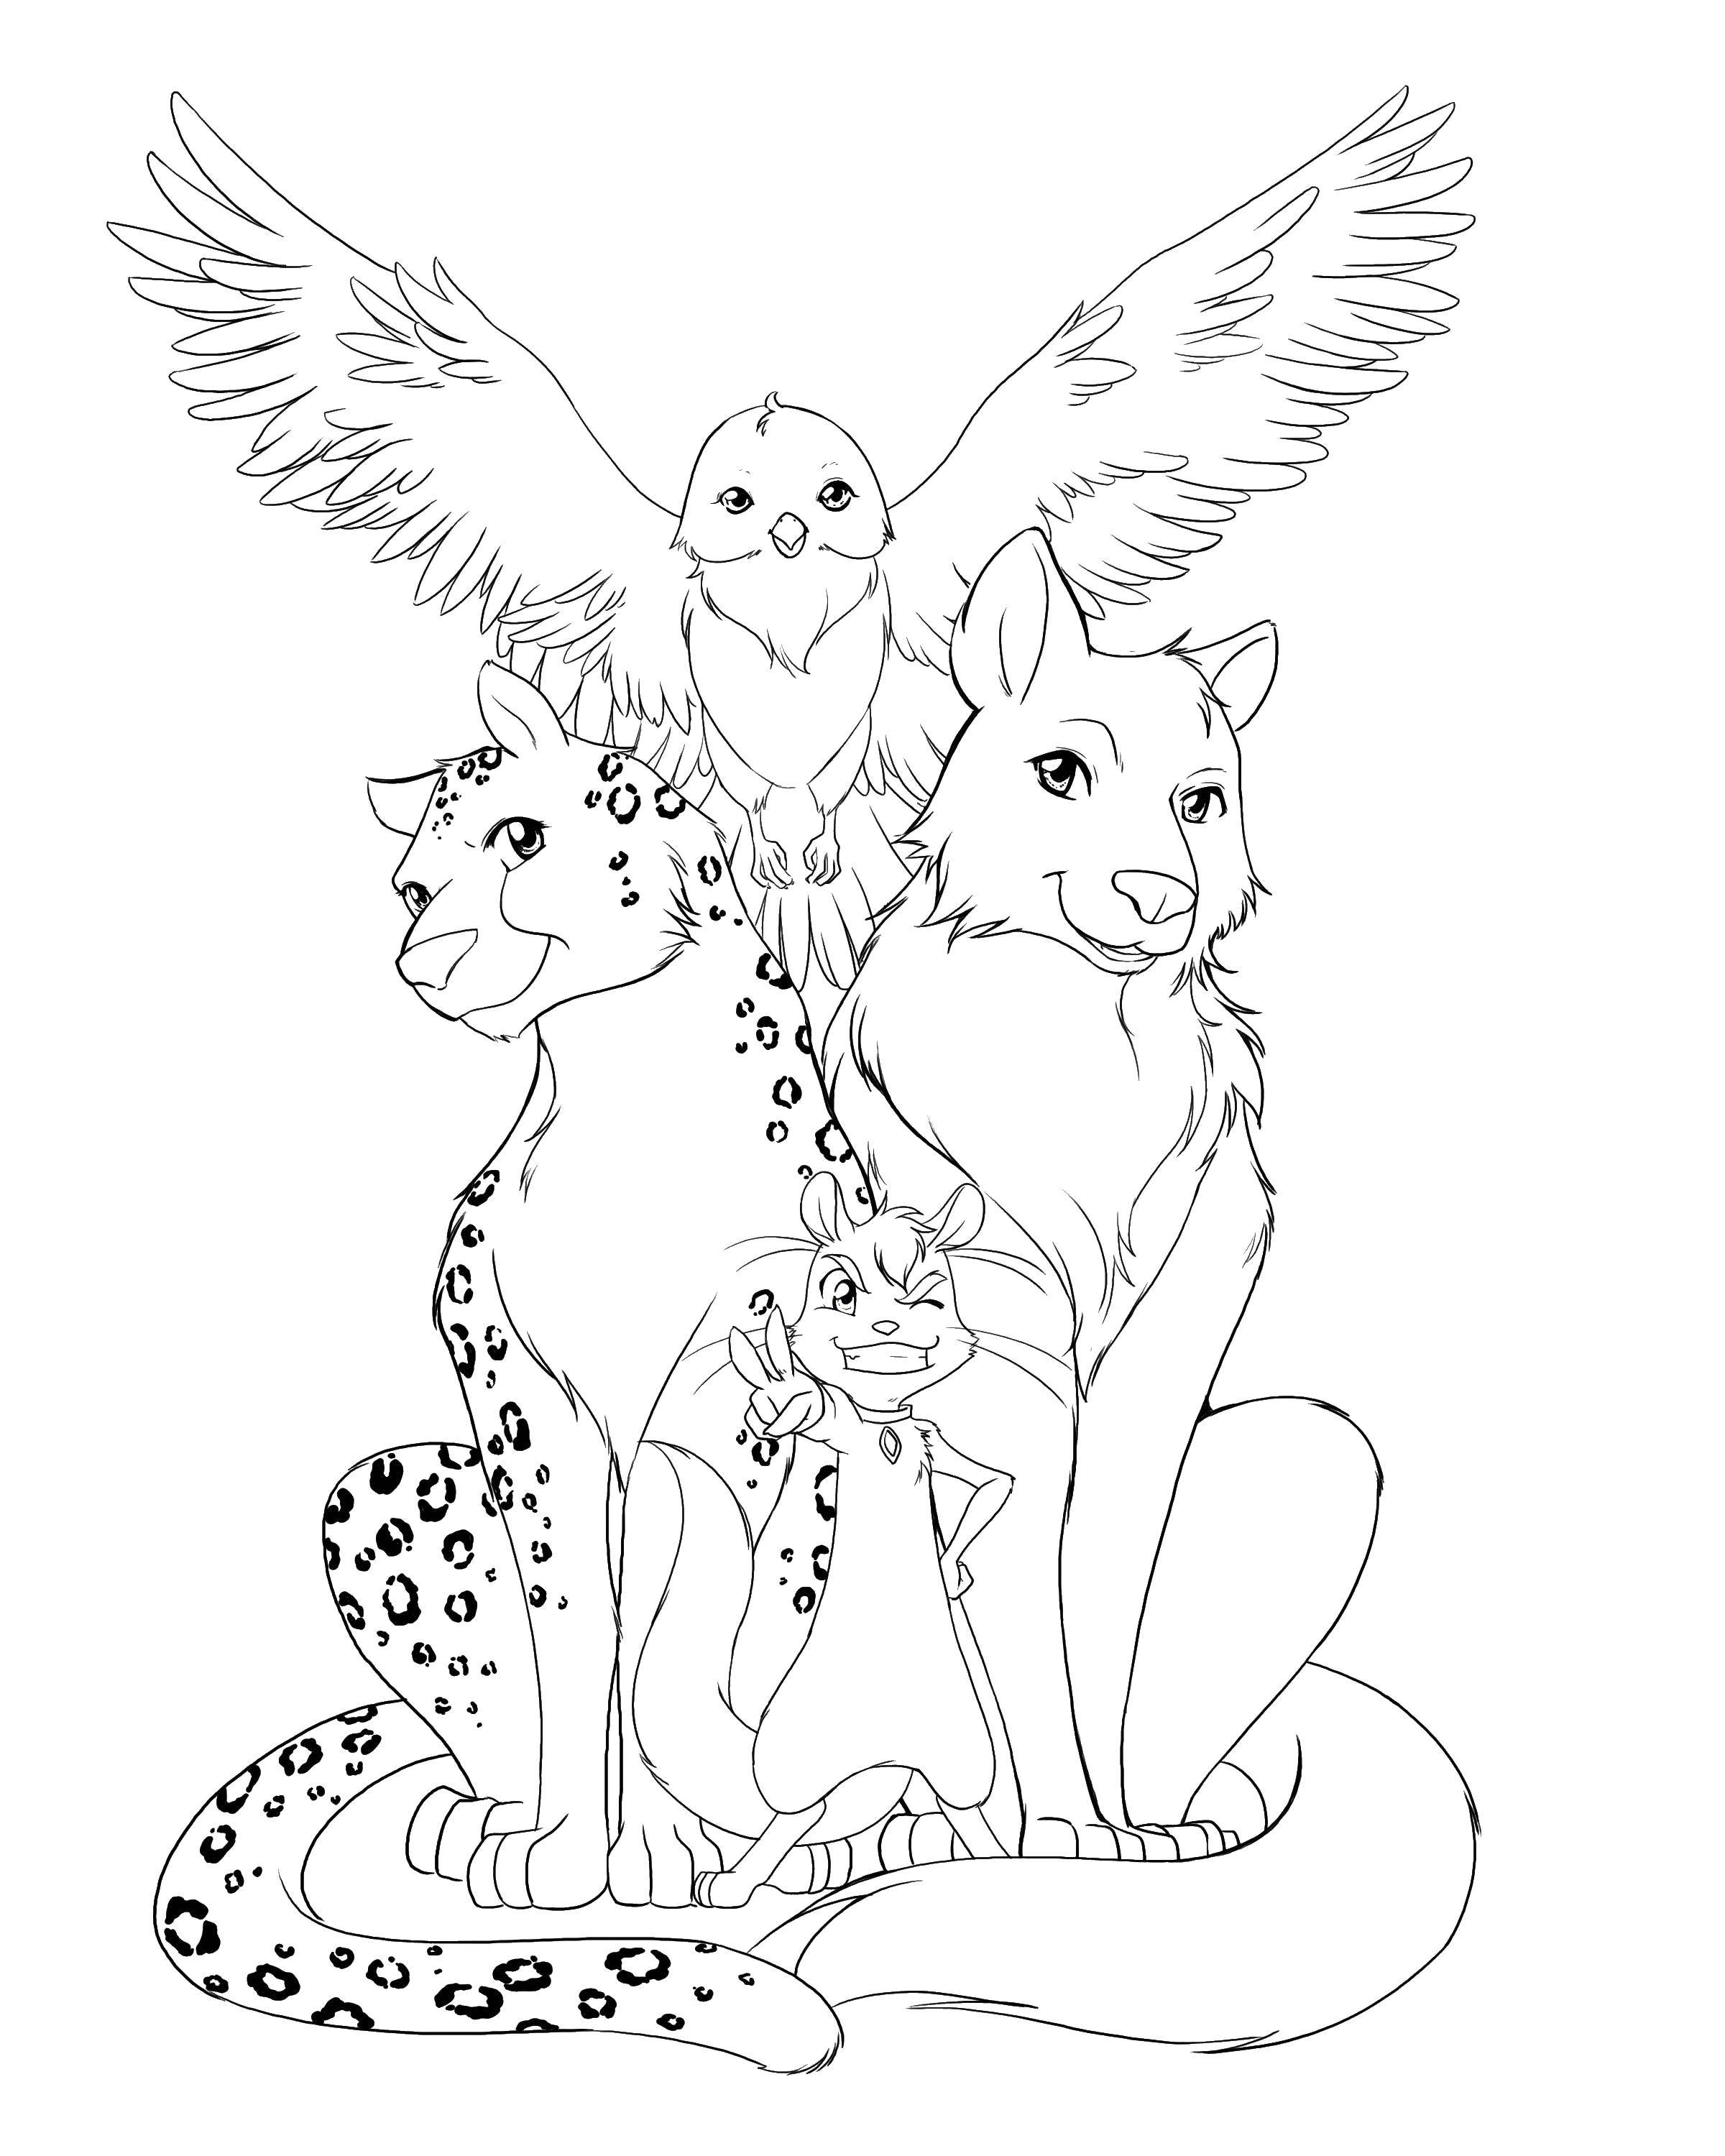 Coloring The wolf and the leopard, owl, mouse. Category wild animals. Tags:  animals, wolf, leopard, owl, mouse.